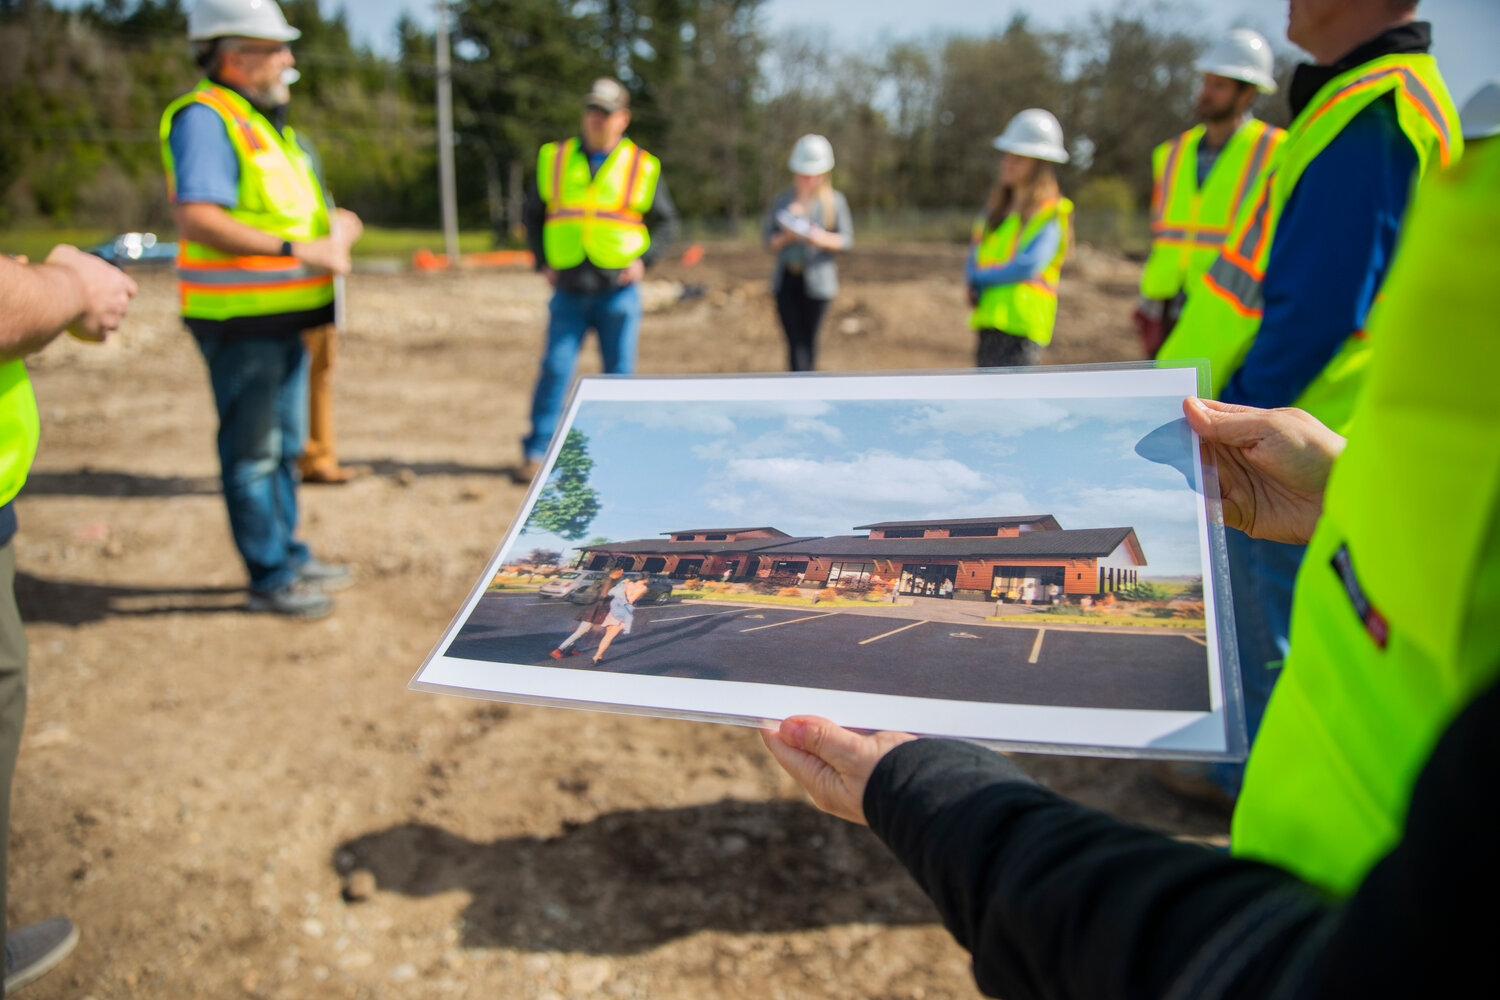 Image renderings are passed around on the construction site of an agricultural park along Old Highway 99 SE in Tenino on Thursday, April 27, 2023.